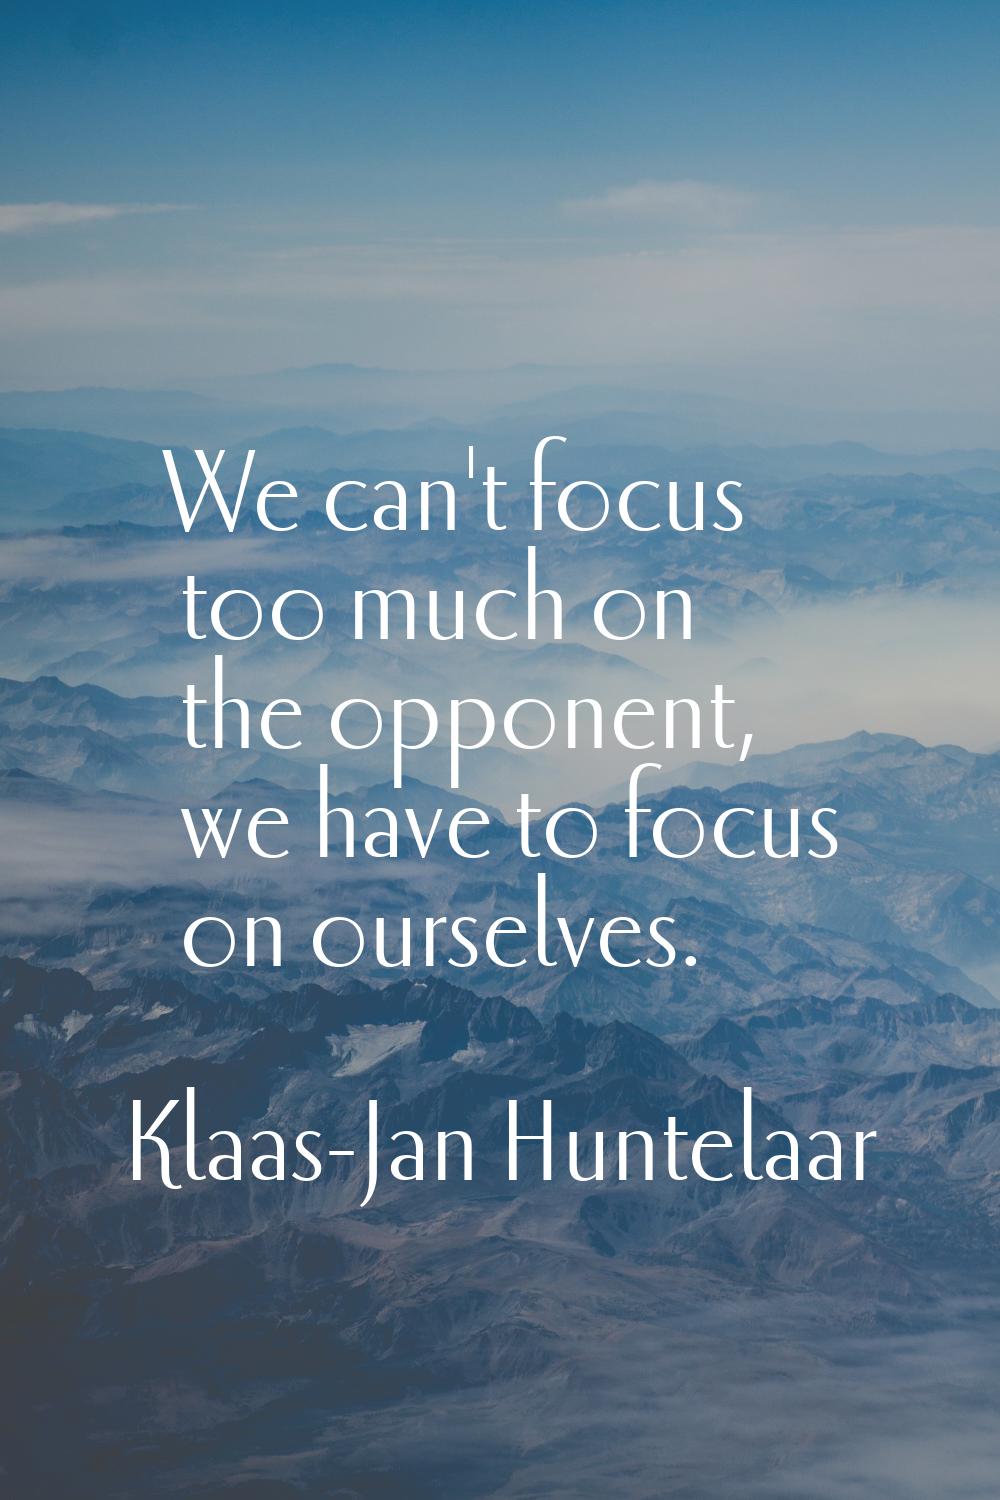 We can't focus too much on the opponent, we have to focus on ourselves.